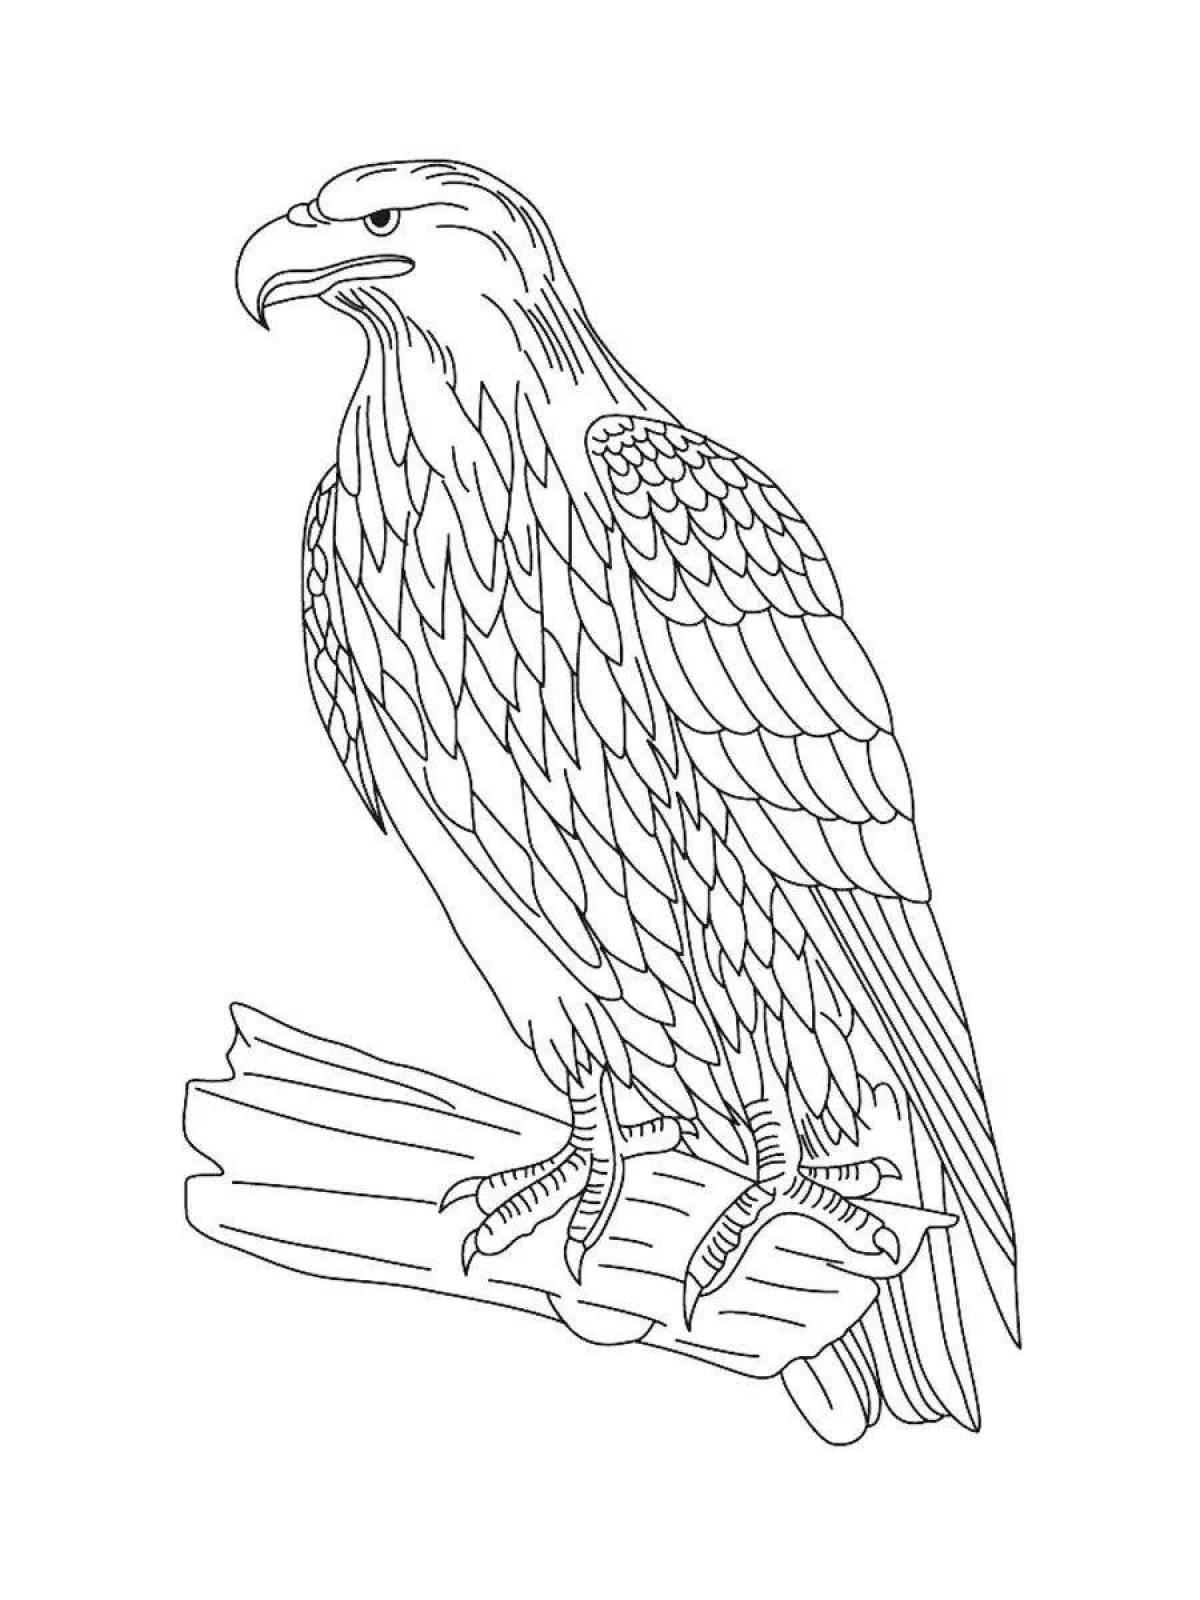 Exotic kite coloring page